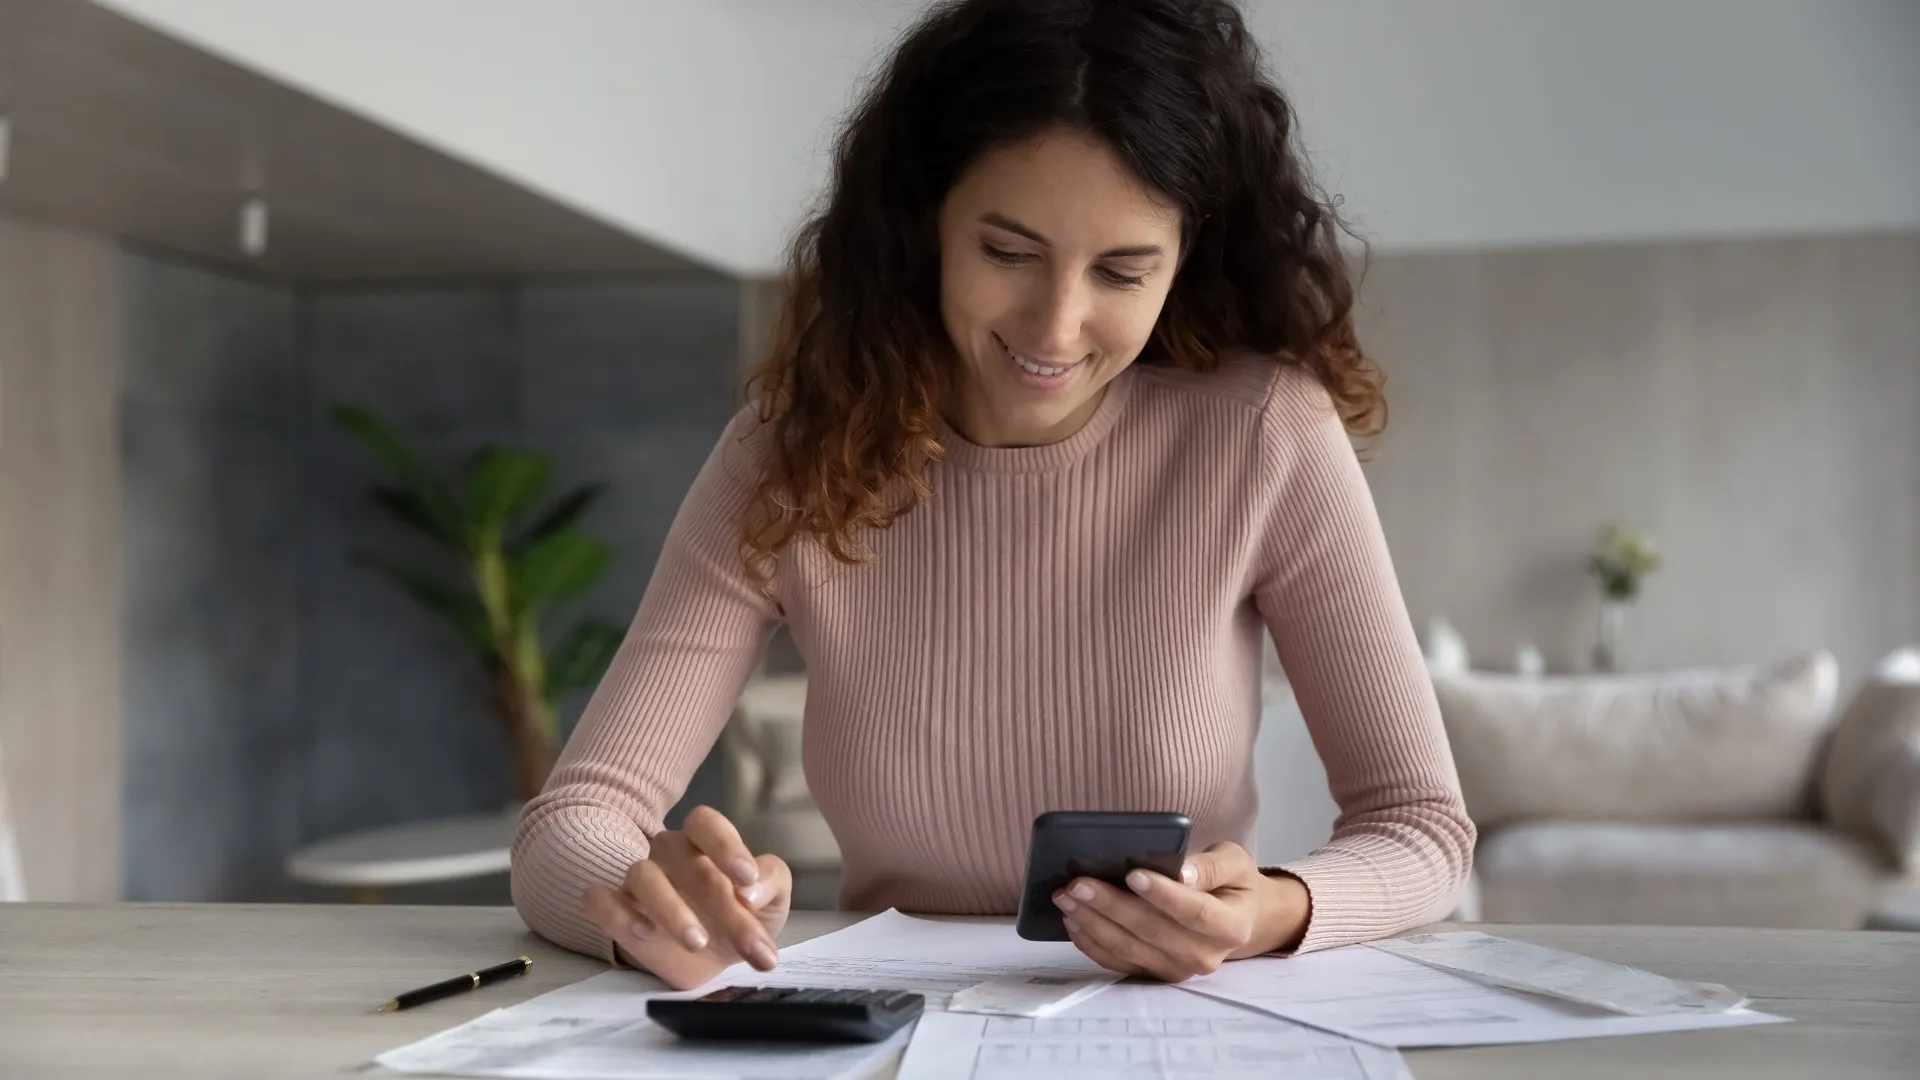 Smiling woman using smartphone and calculator, working with financial documents stock photo